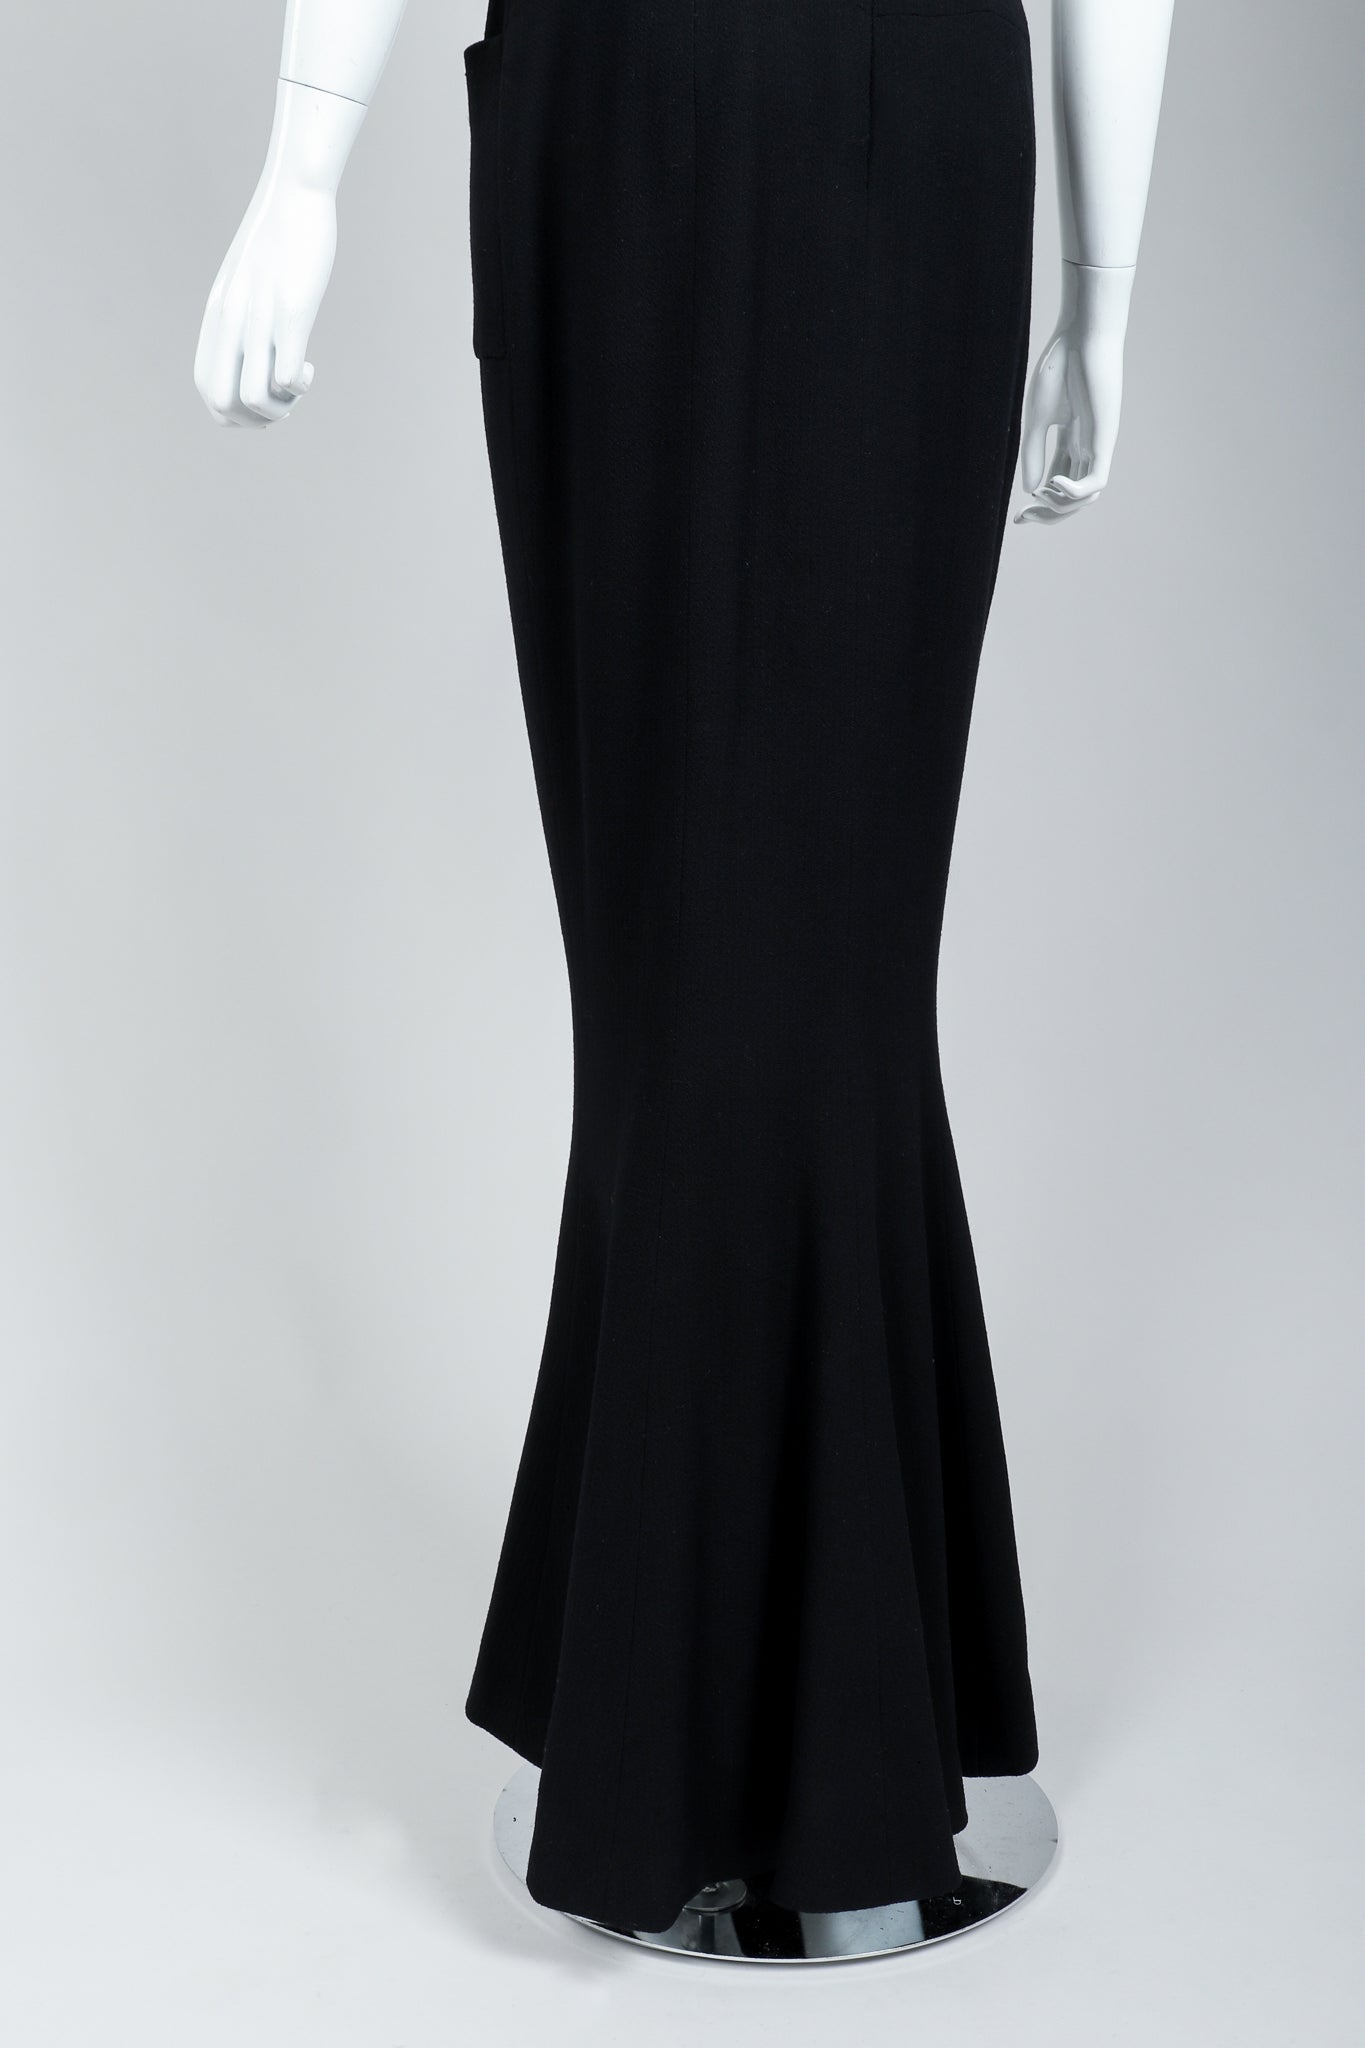 Vintage Chanel Breakfast At Tiffany's Style Black Fishtail Gown on Mannequin, Skirt